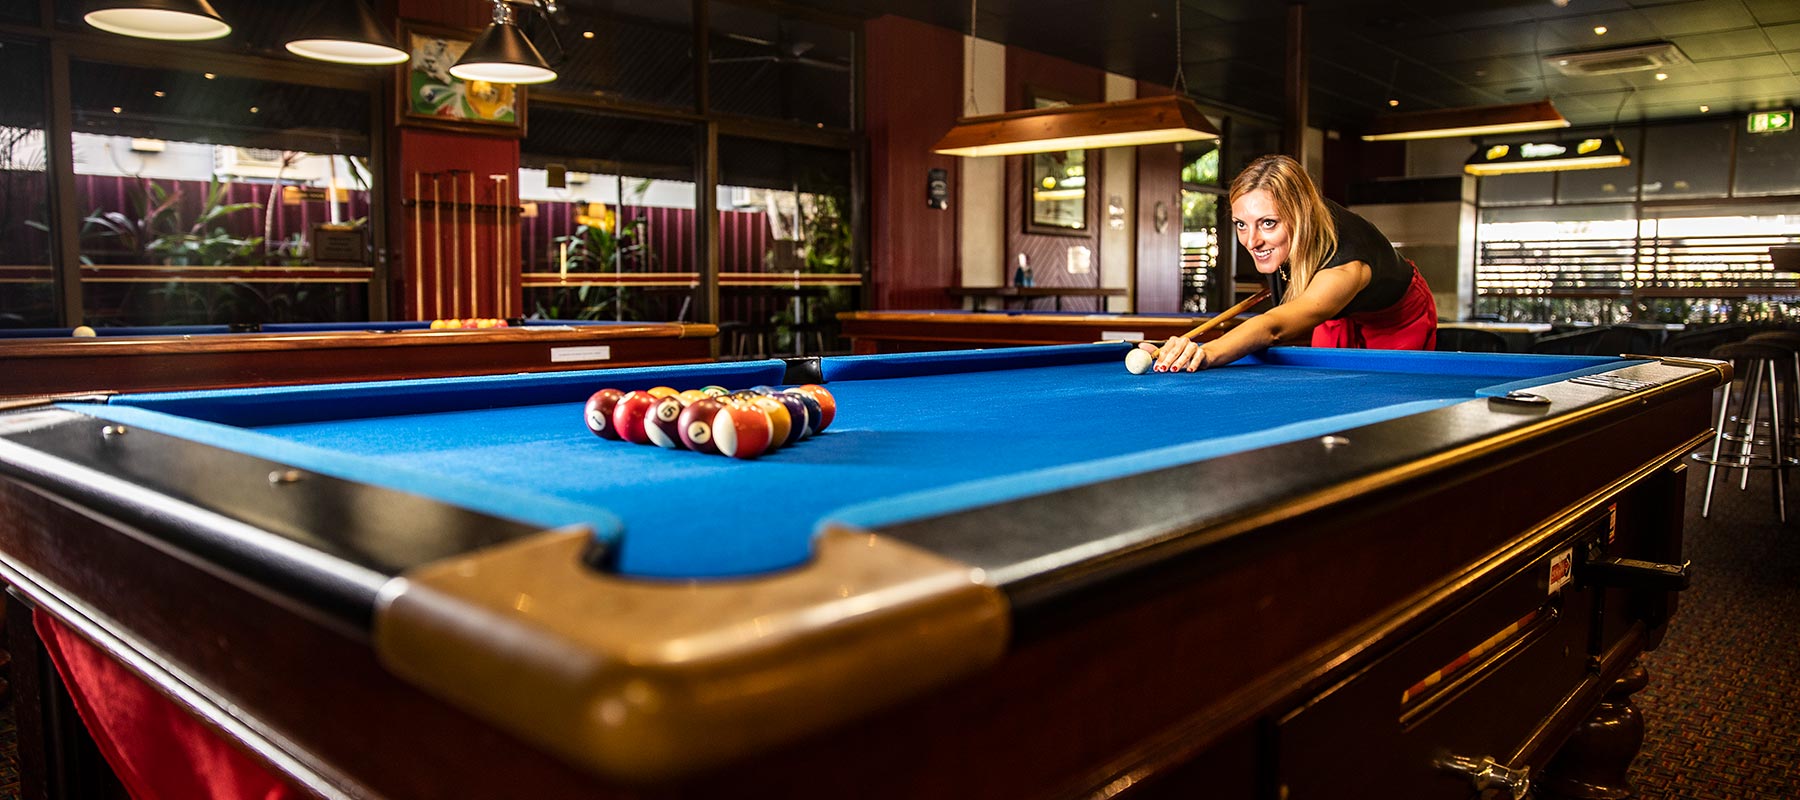 The Golden Gecko Hotel sports bar pool table